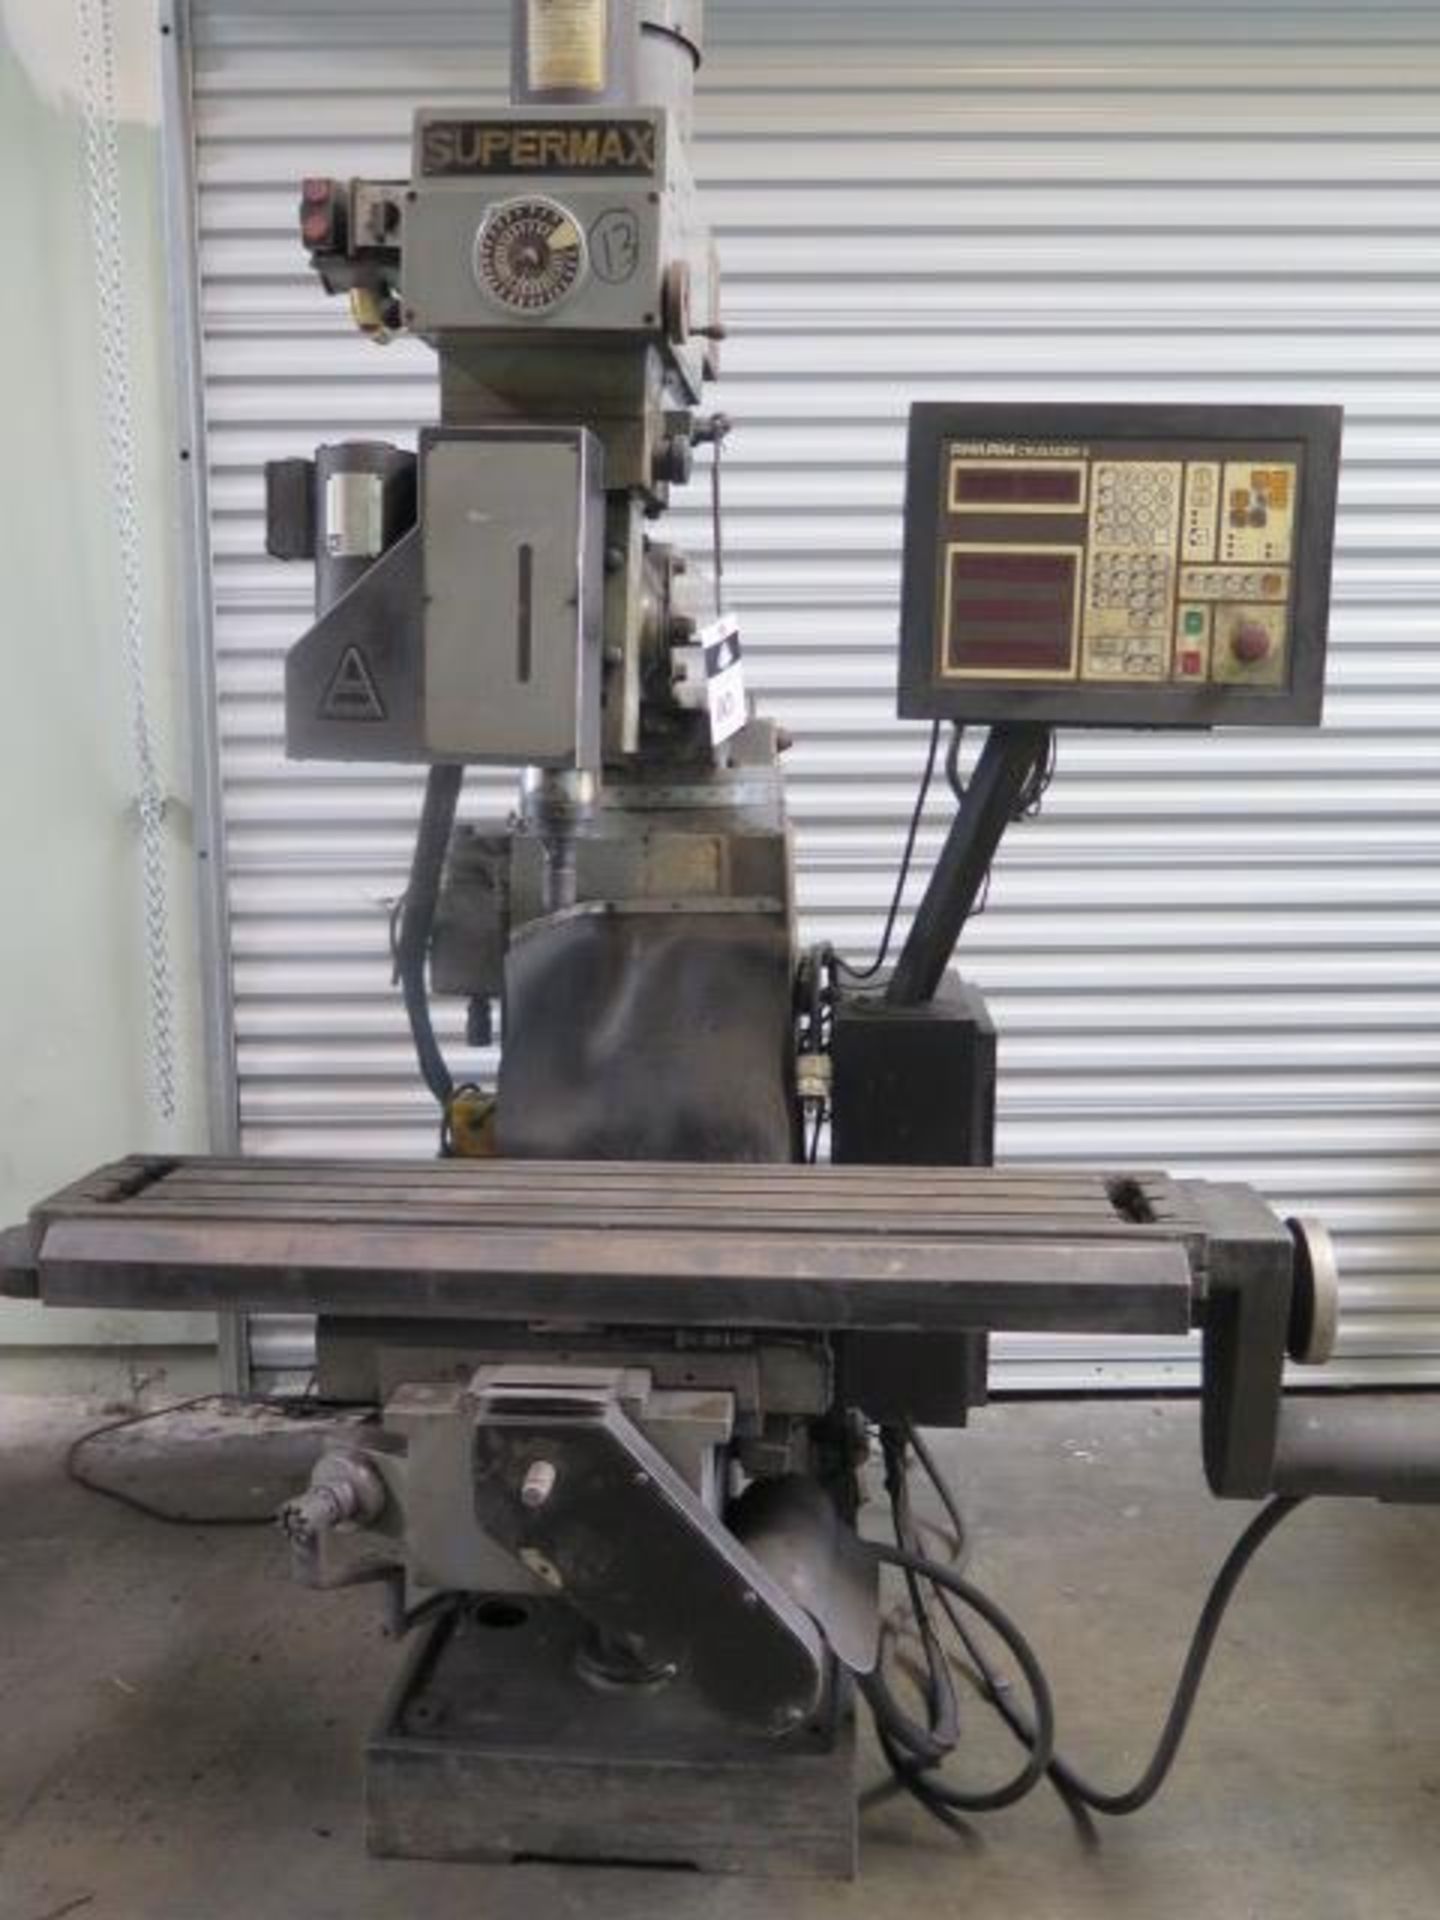 Supermax 3-Axis CNC Vertical Mill w/ Anilam Crusader II Controls, 60-4200 Dial Change RPM, Power